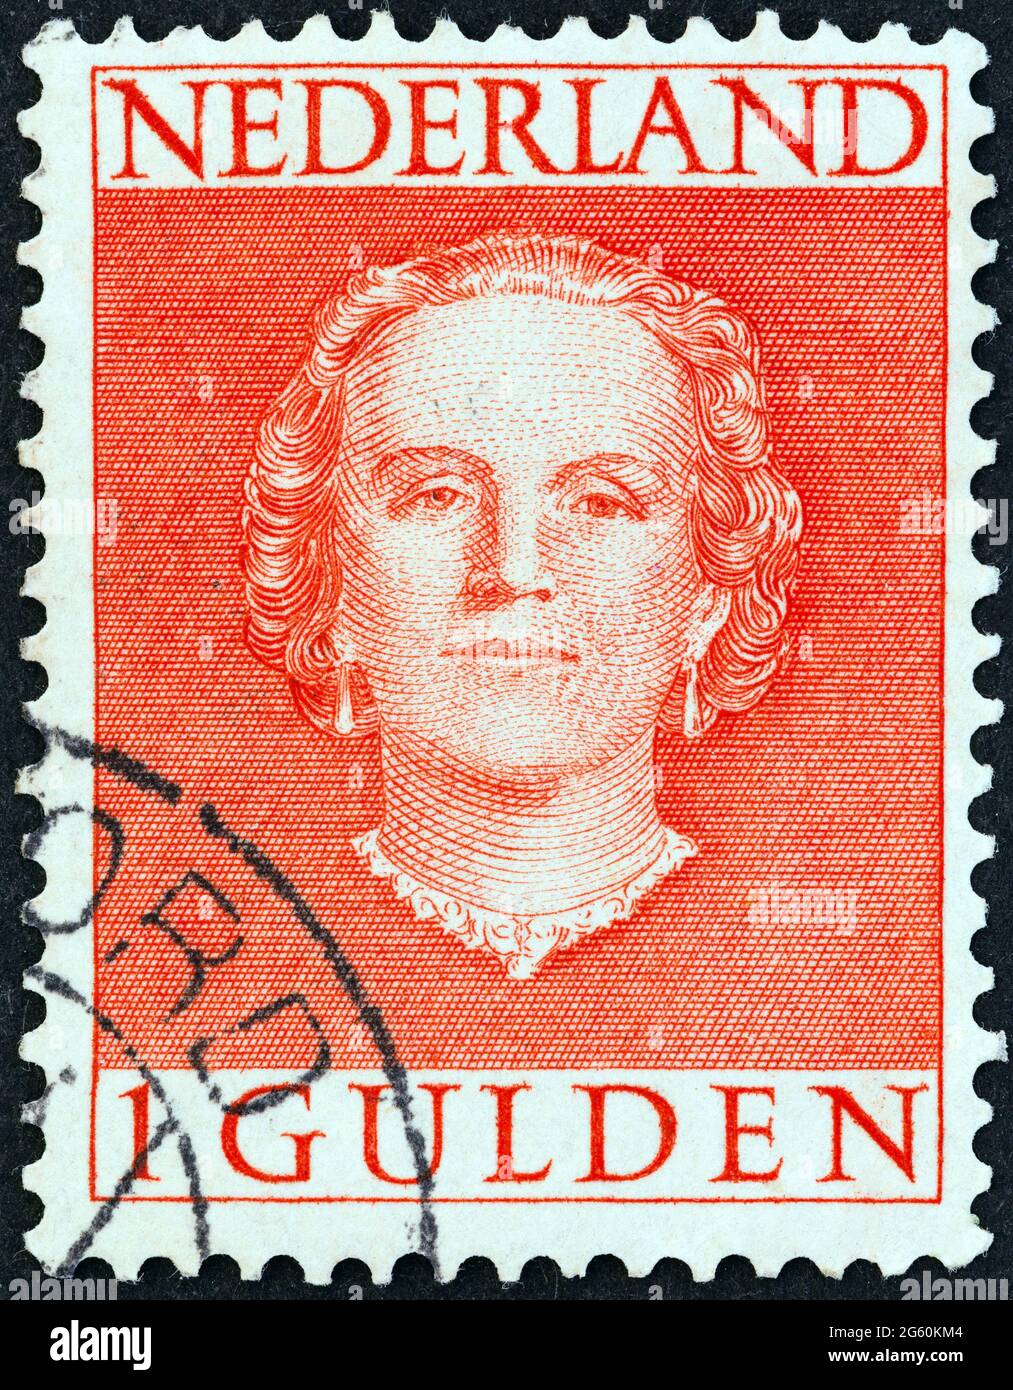 NETHERLANDS - CIRCA 1949: A stamp printed in the Netherlands shows Queen Juliana, circa 1949. Stock Photo